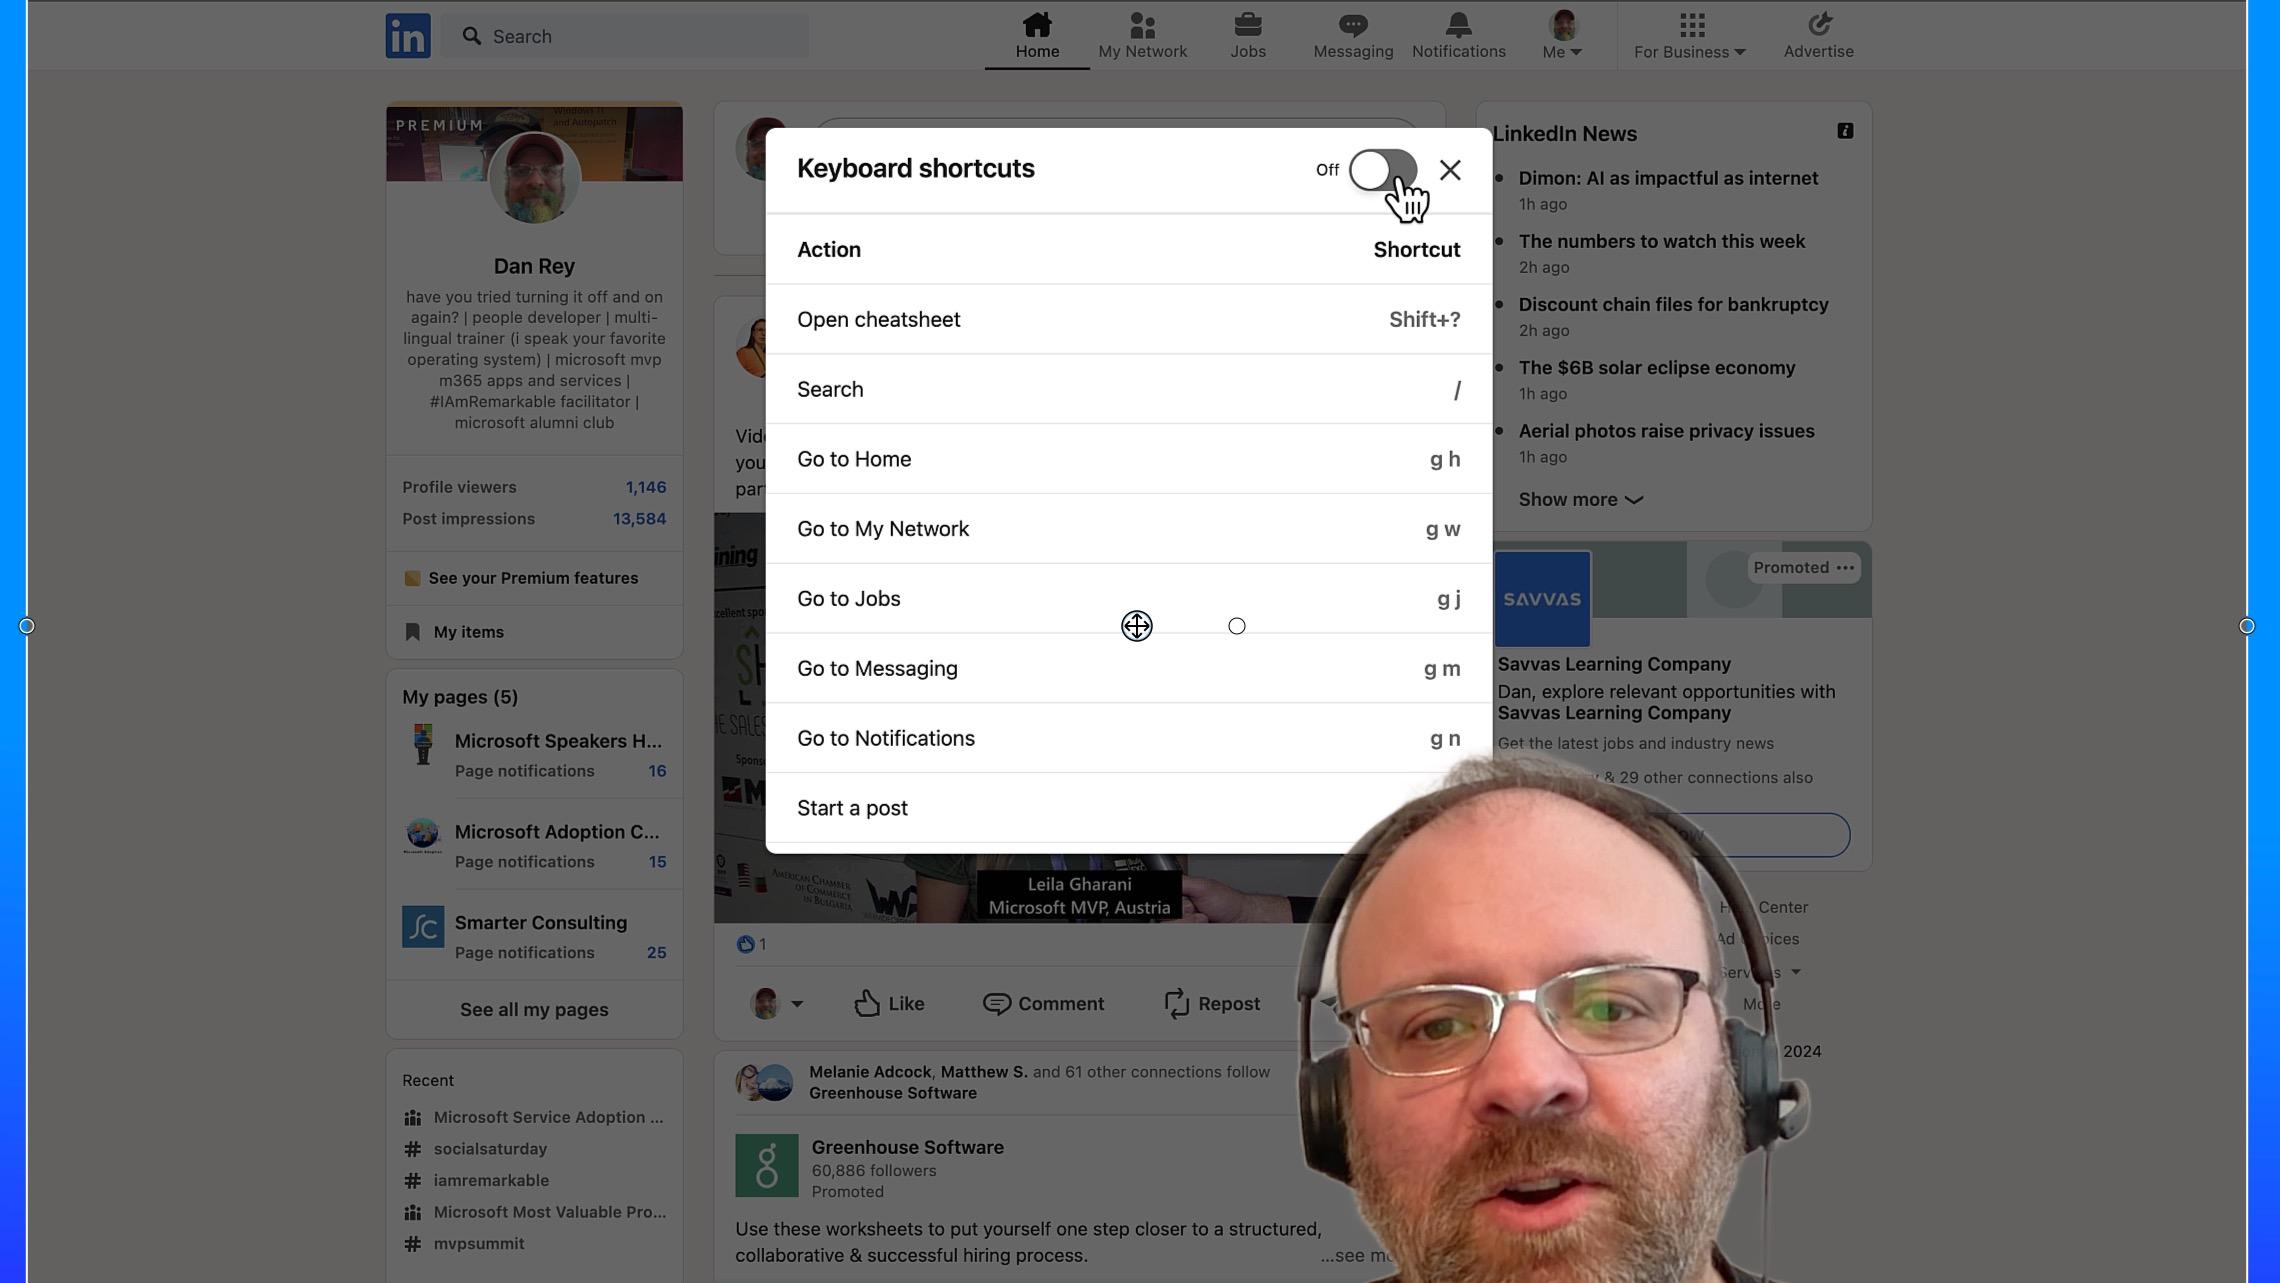 LinkedIn Keyboard Shortcuts! Help with your video, posts and searching needs!